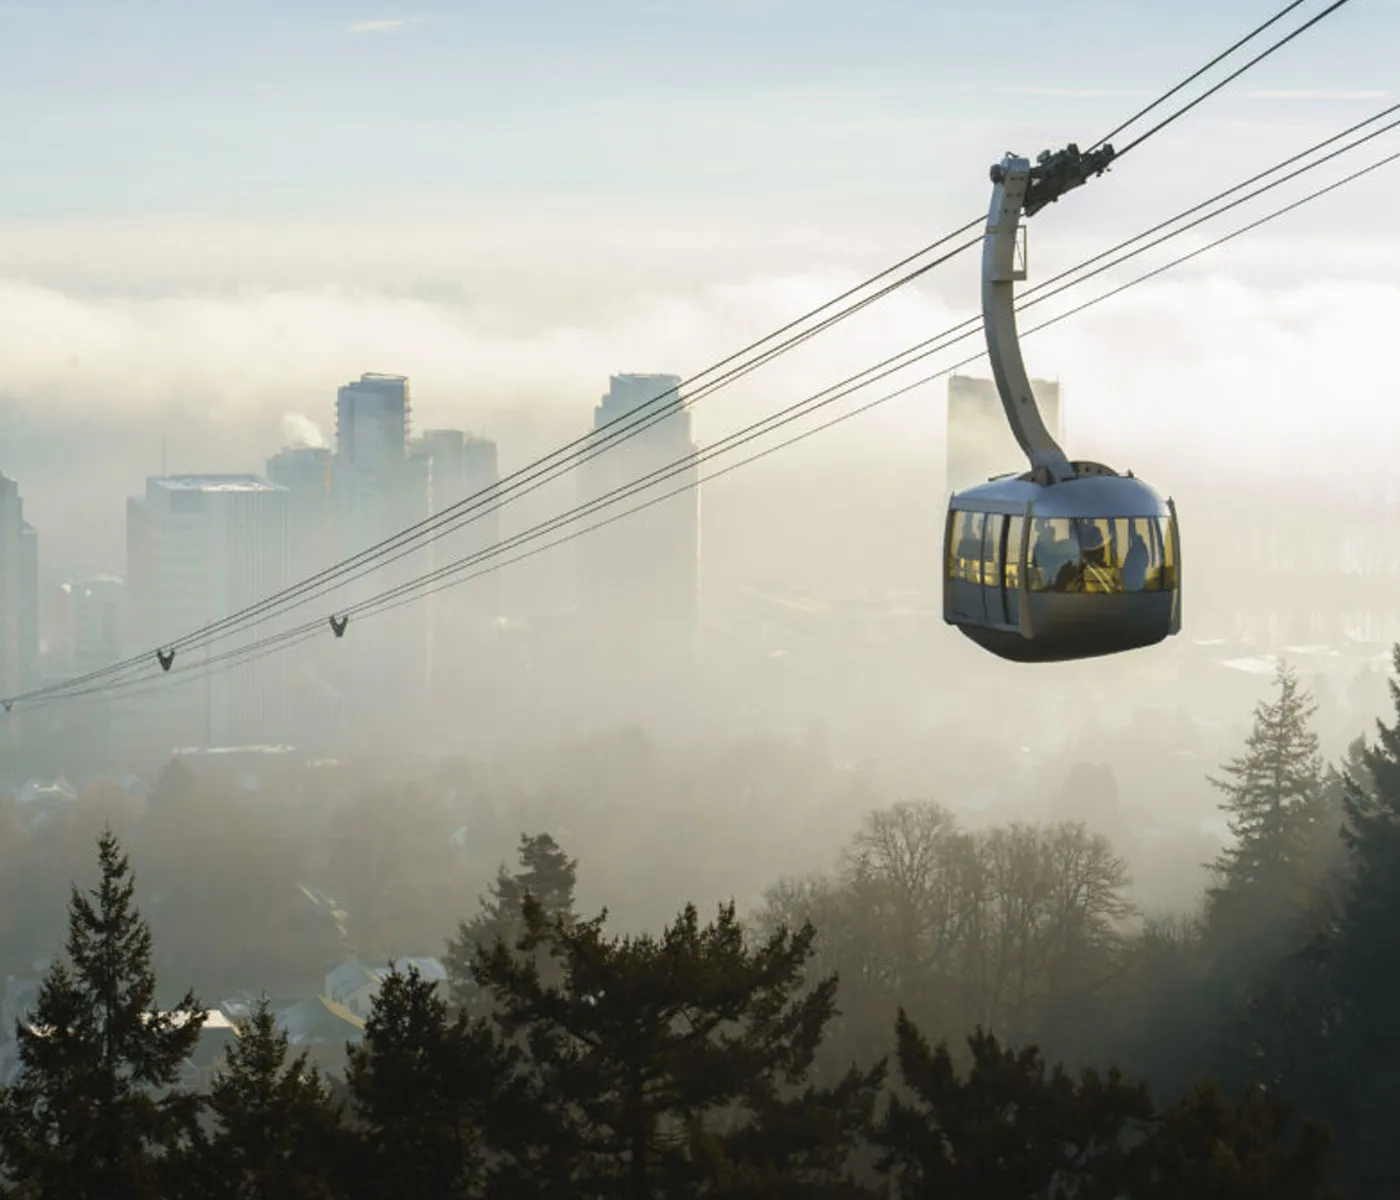 OHSU tram in the fog with waterfront campus in the background